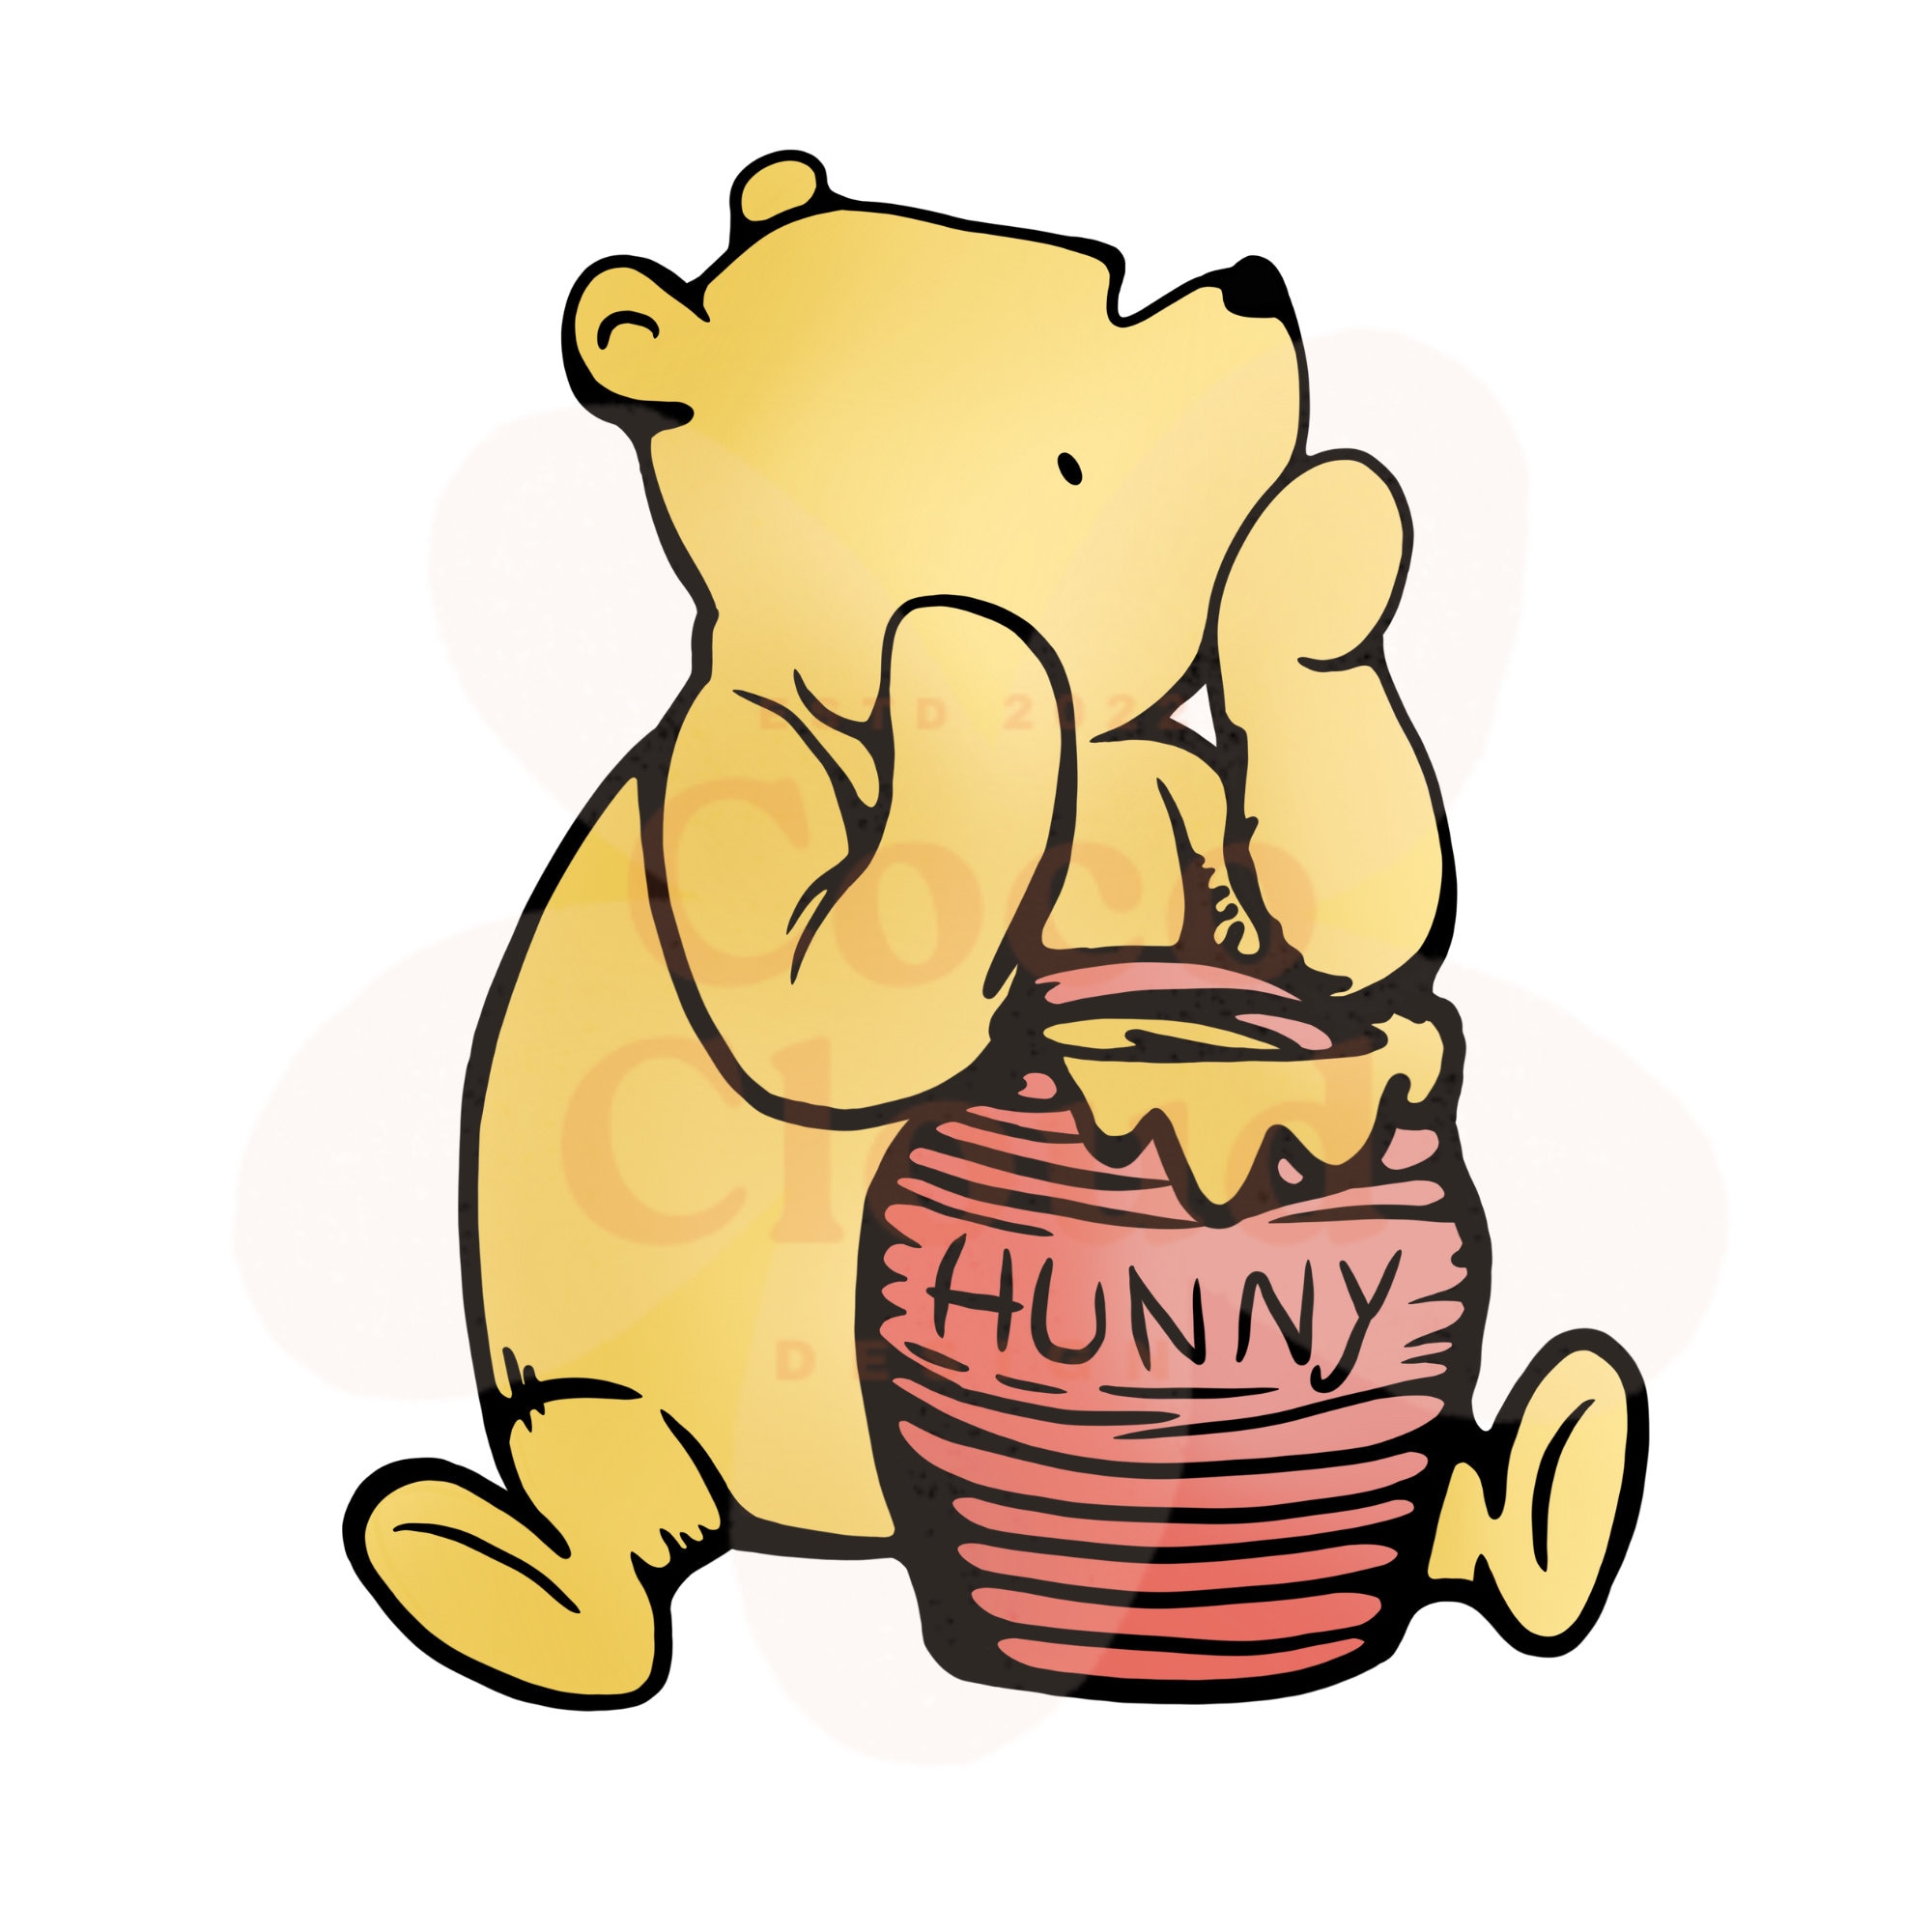 Disney Winnie the Pooh Covered Honey Pot Inscribed HUNNY with